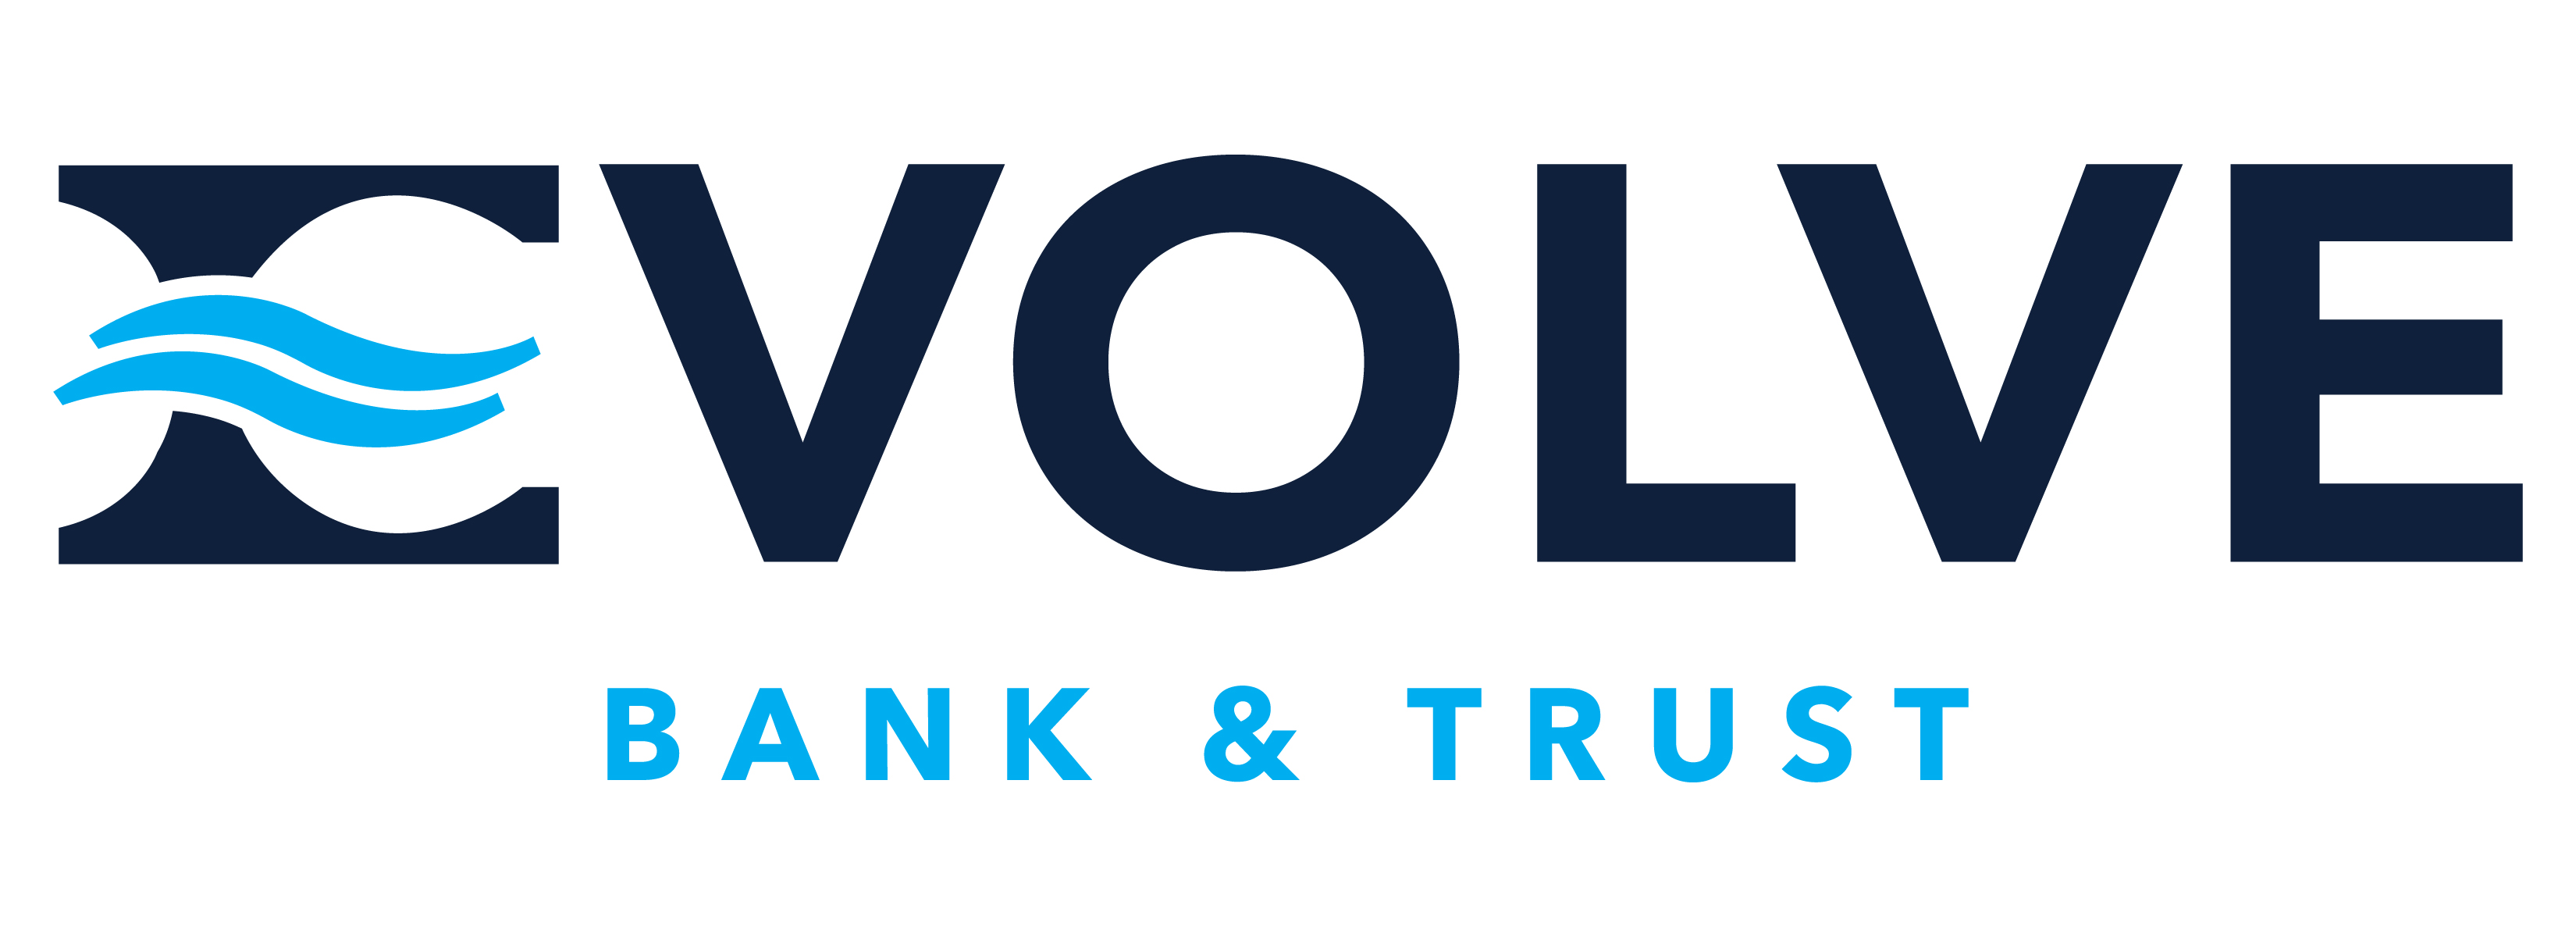 Evolve Bank & Trust to Be a Gold Kite Sponsor of the 40th Youth Villages 5K thumbnail